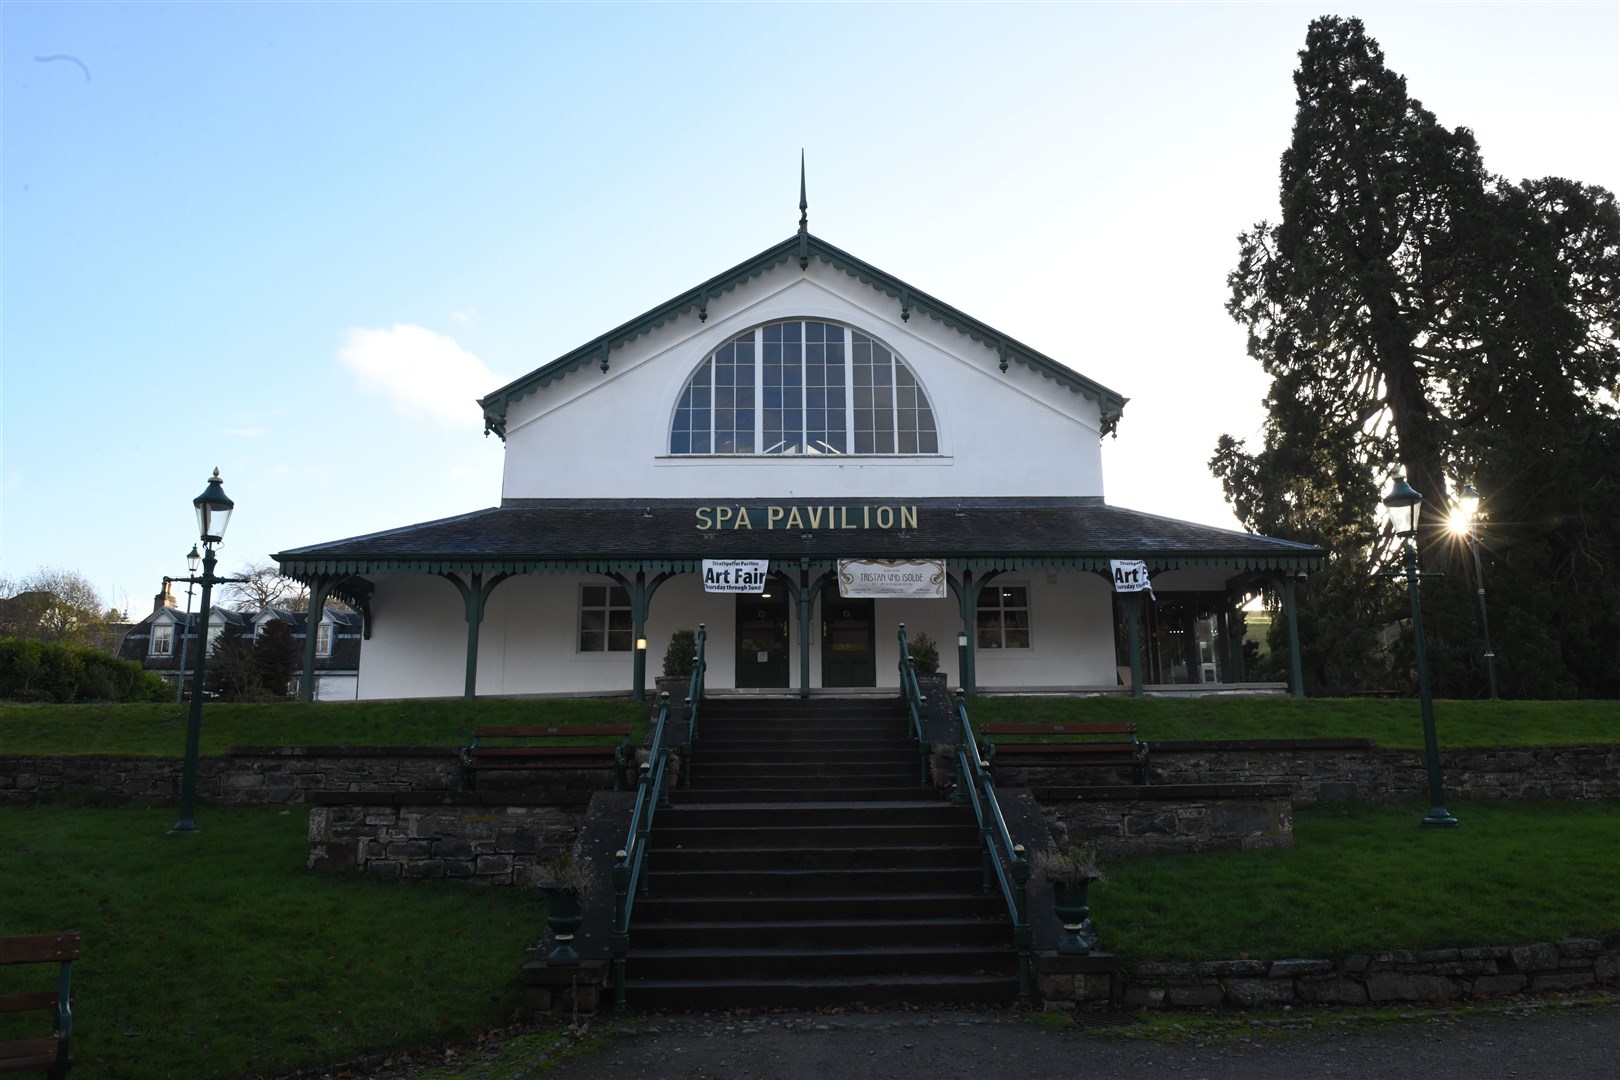 Strathpeffer Pavilion will host the performance later this month. Picture: James Mackenzie